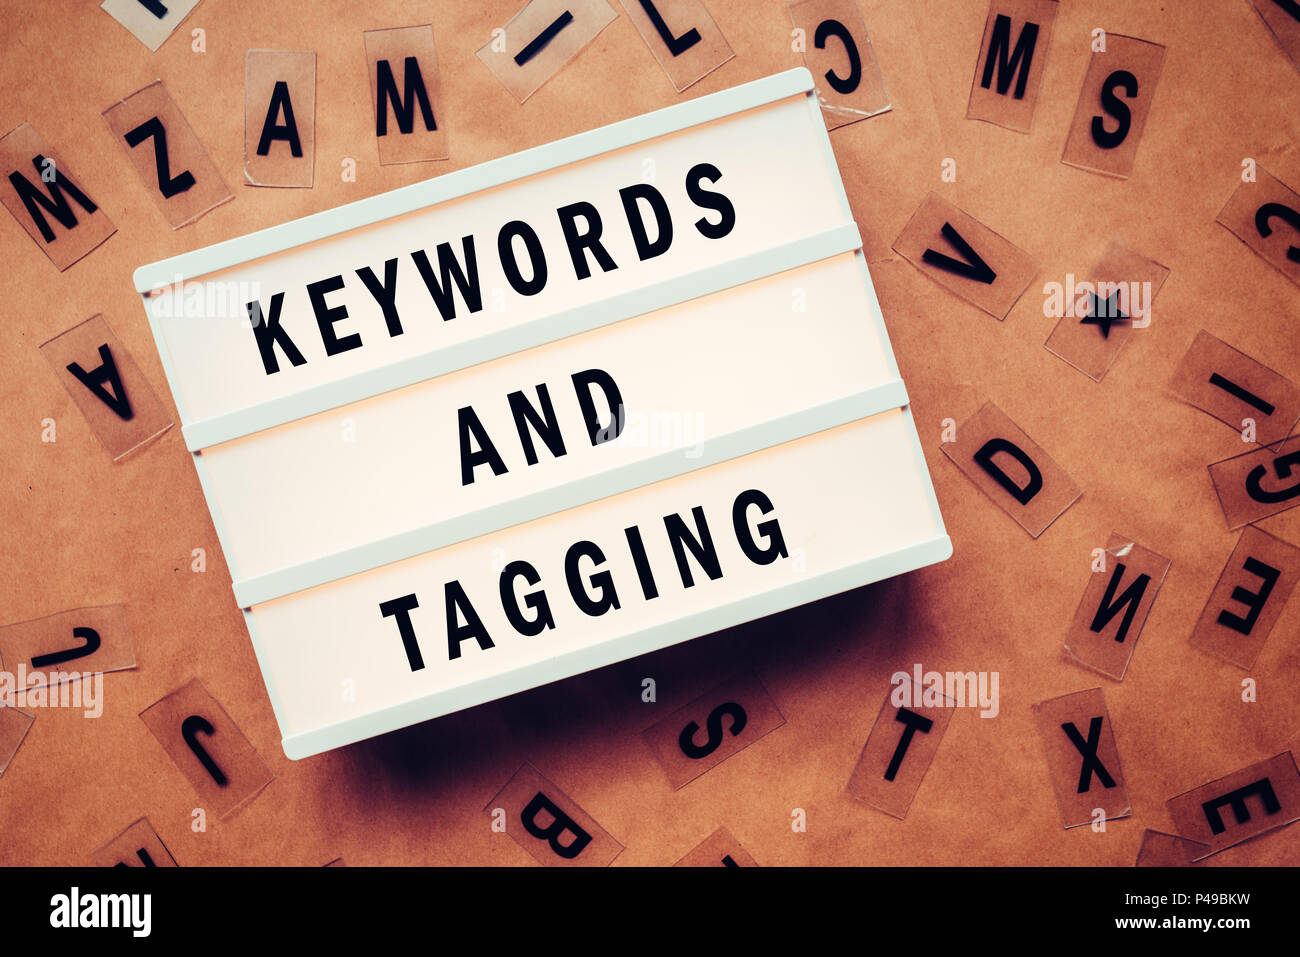 Keywords and tagging are important for online internet marketing, conceptual image with letters on lightbox Stock Photo